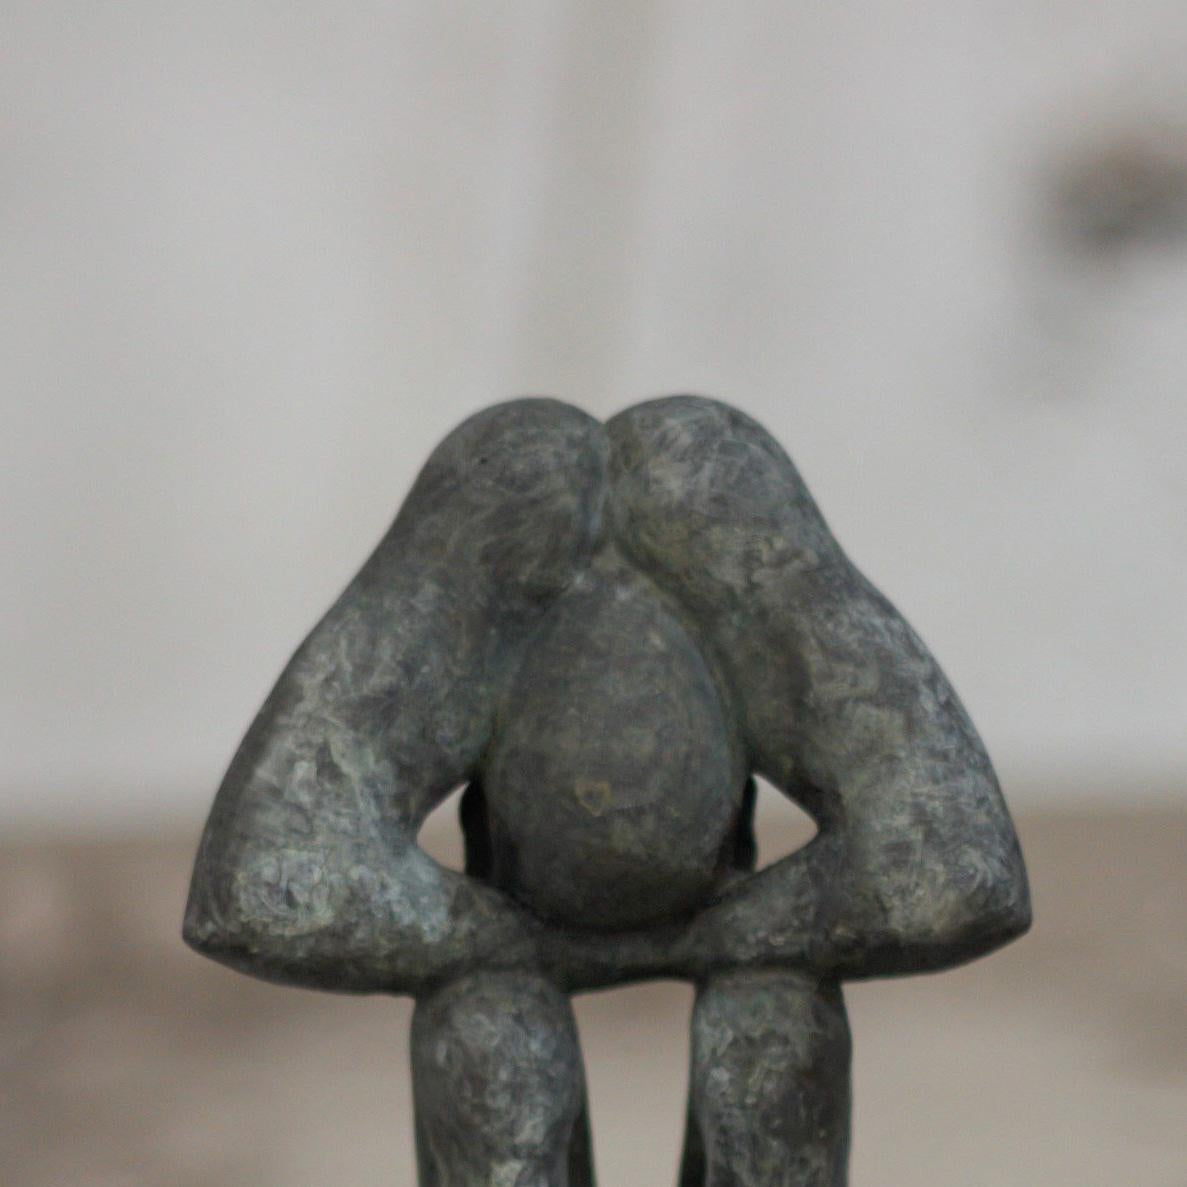 emptiness of the soul sculpture